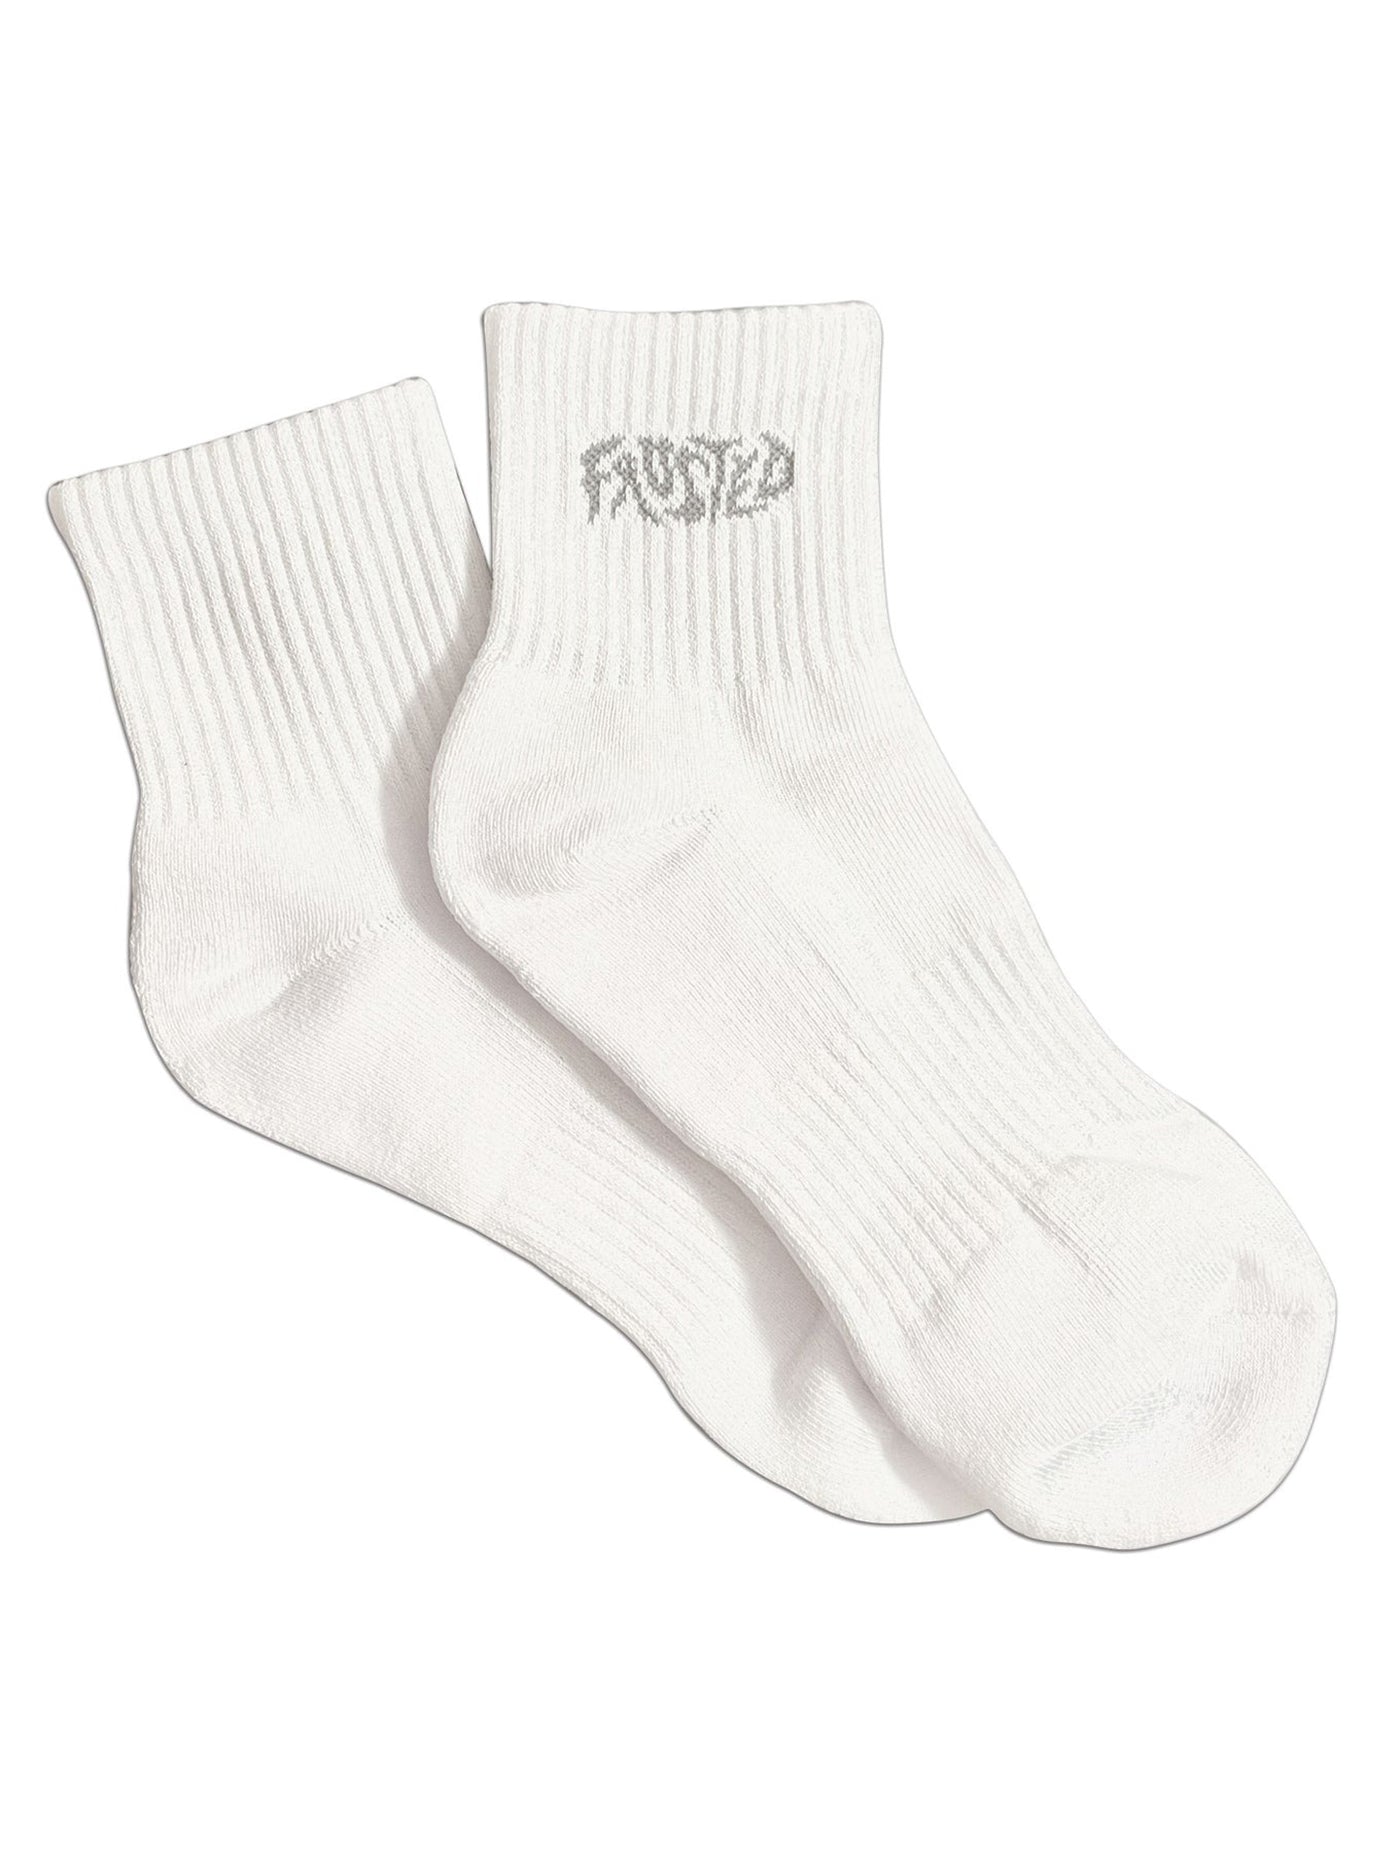 Frosted Skateboards Classic 1/4 Socks